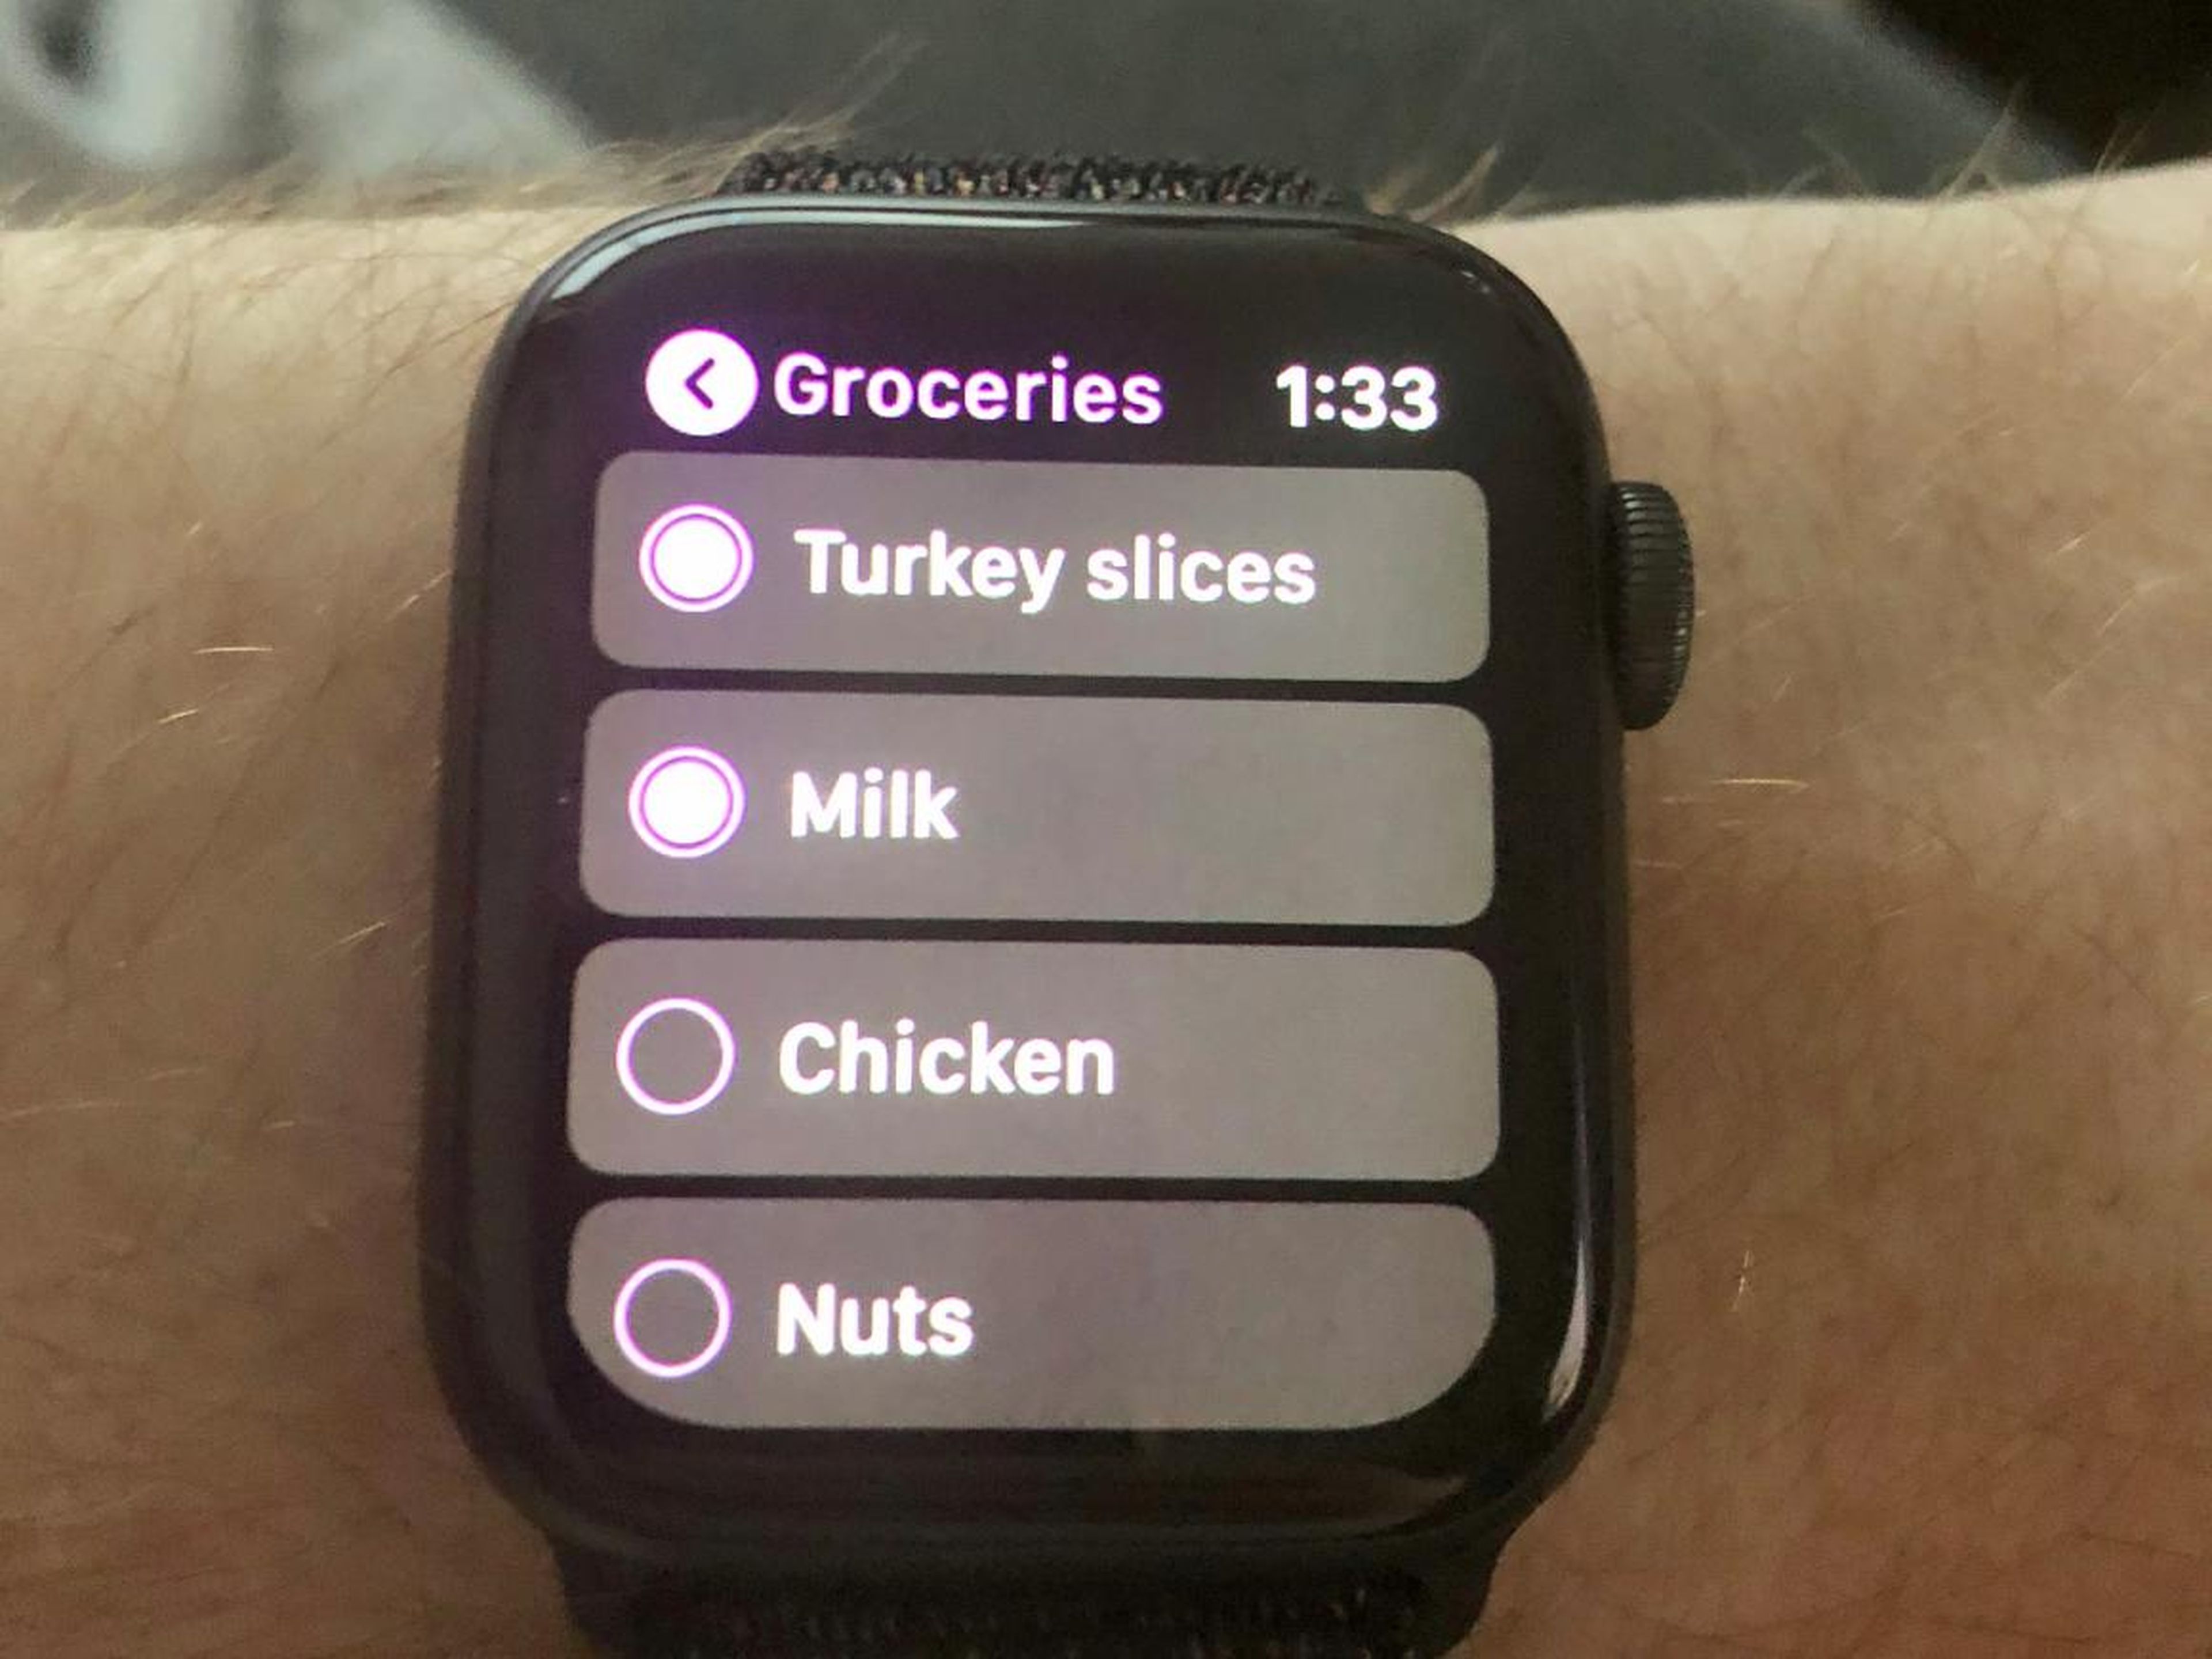 11. You can use the Apple Watch to view your grocery items and cross them off.